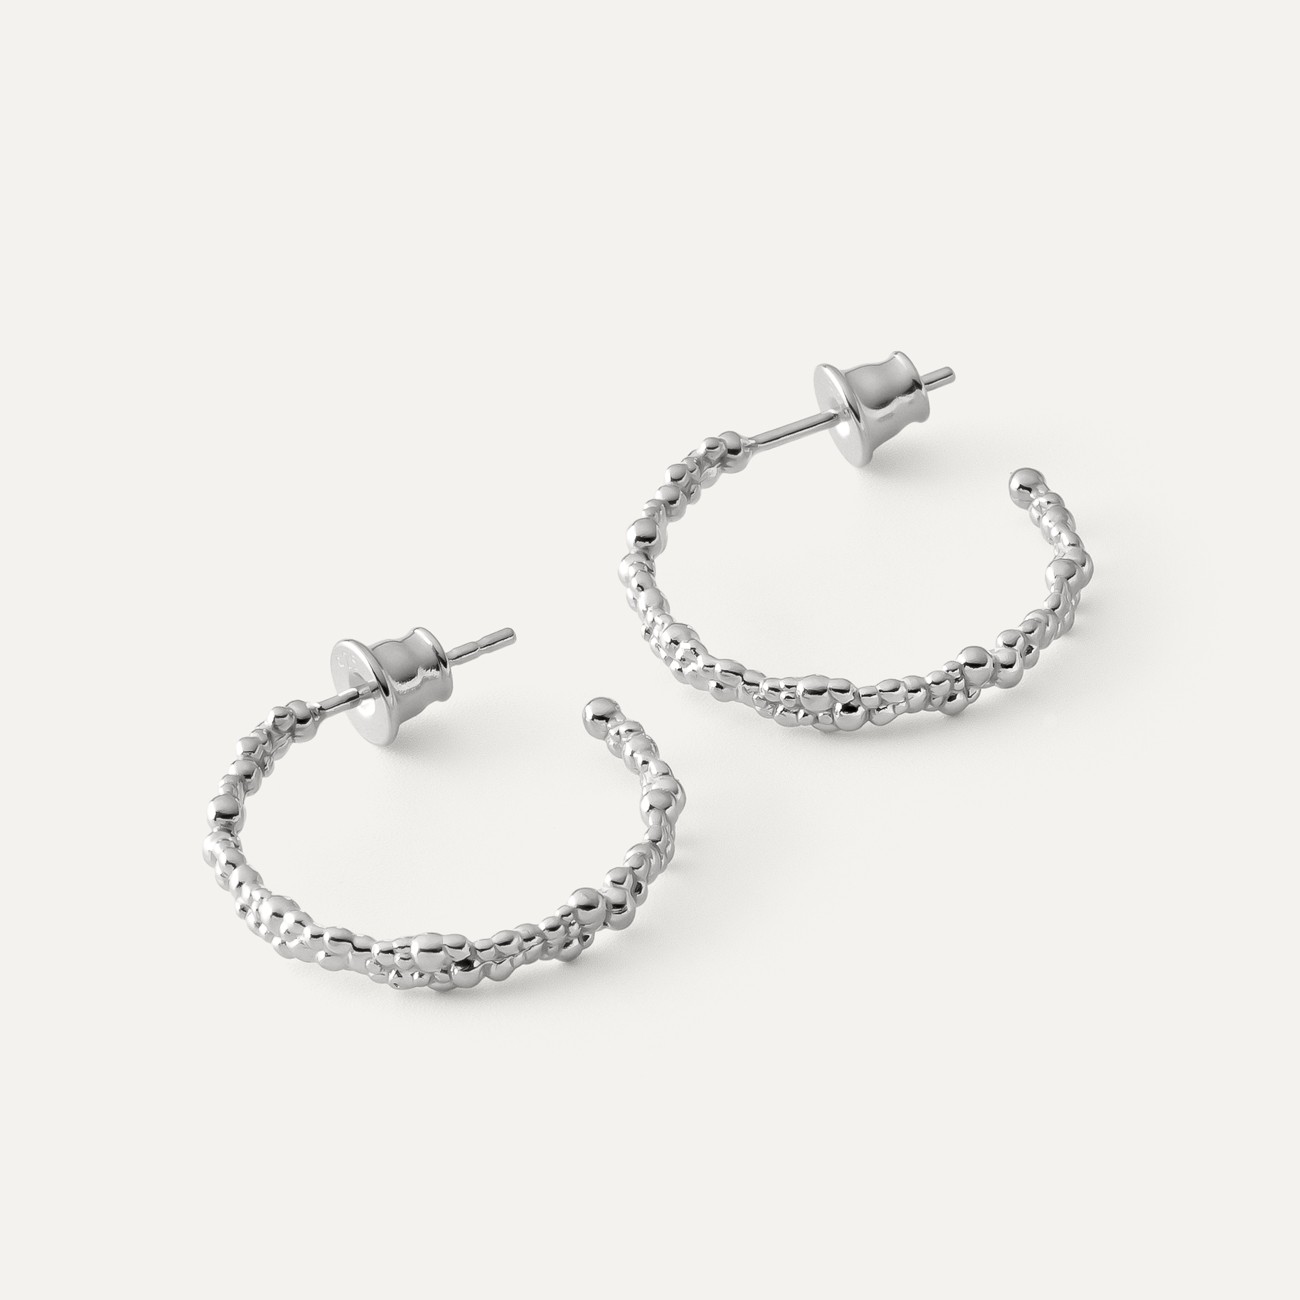 Semi-circle bubble earrings with balls, sterling silver 925